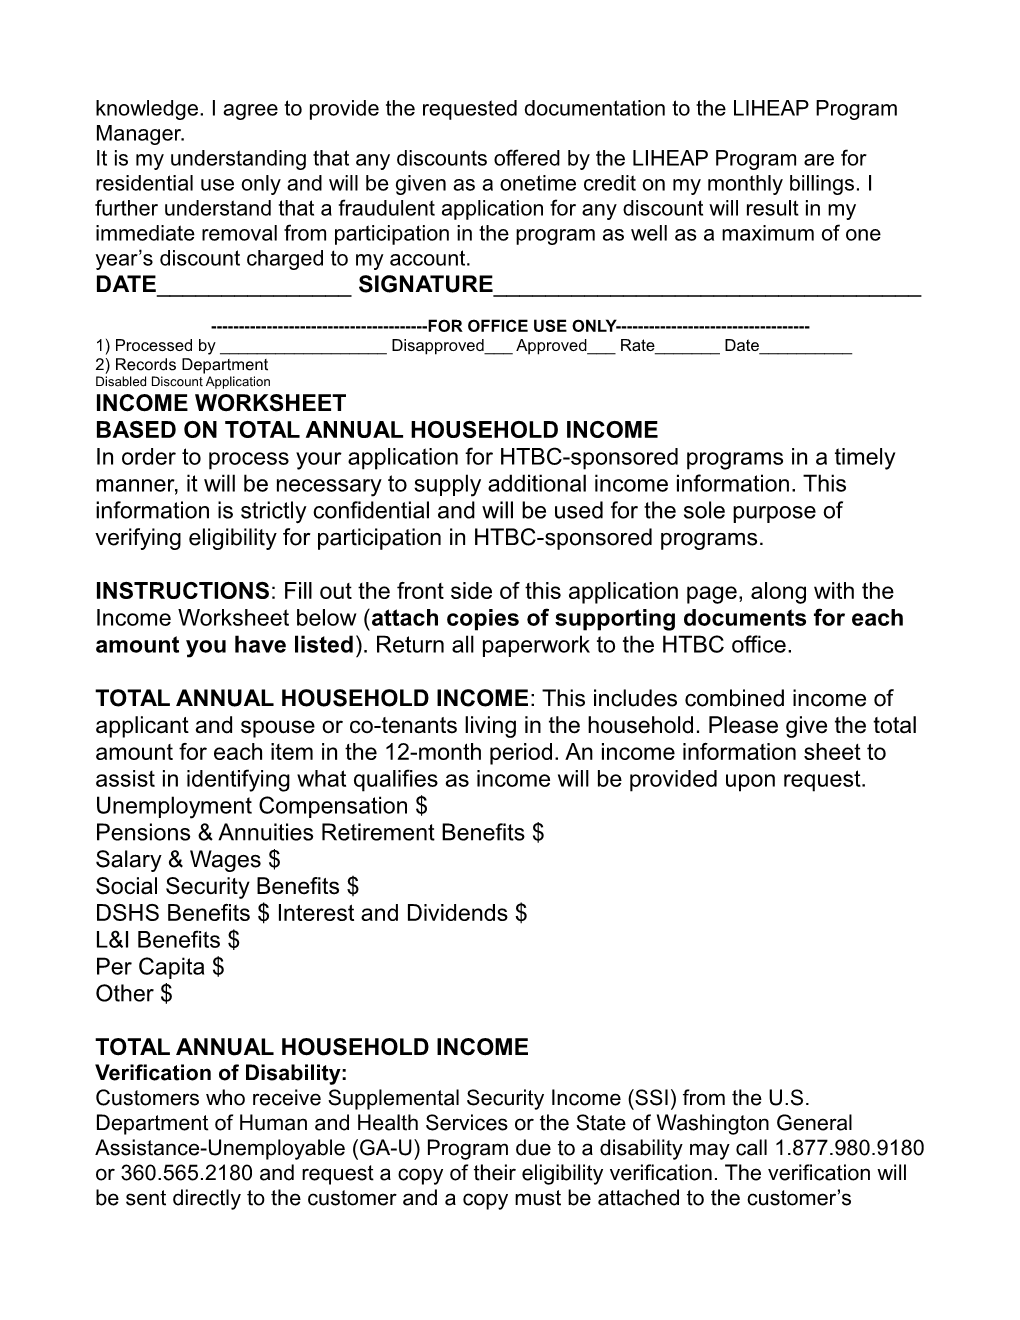 2014 APPLICATION for Hoh River Indian Tribe LIHEAP ELIGIBILITY REQUIREMENTS and CONDITIONS